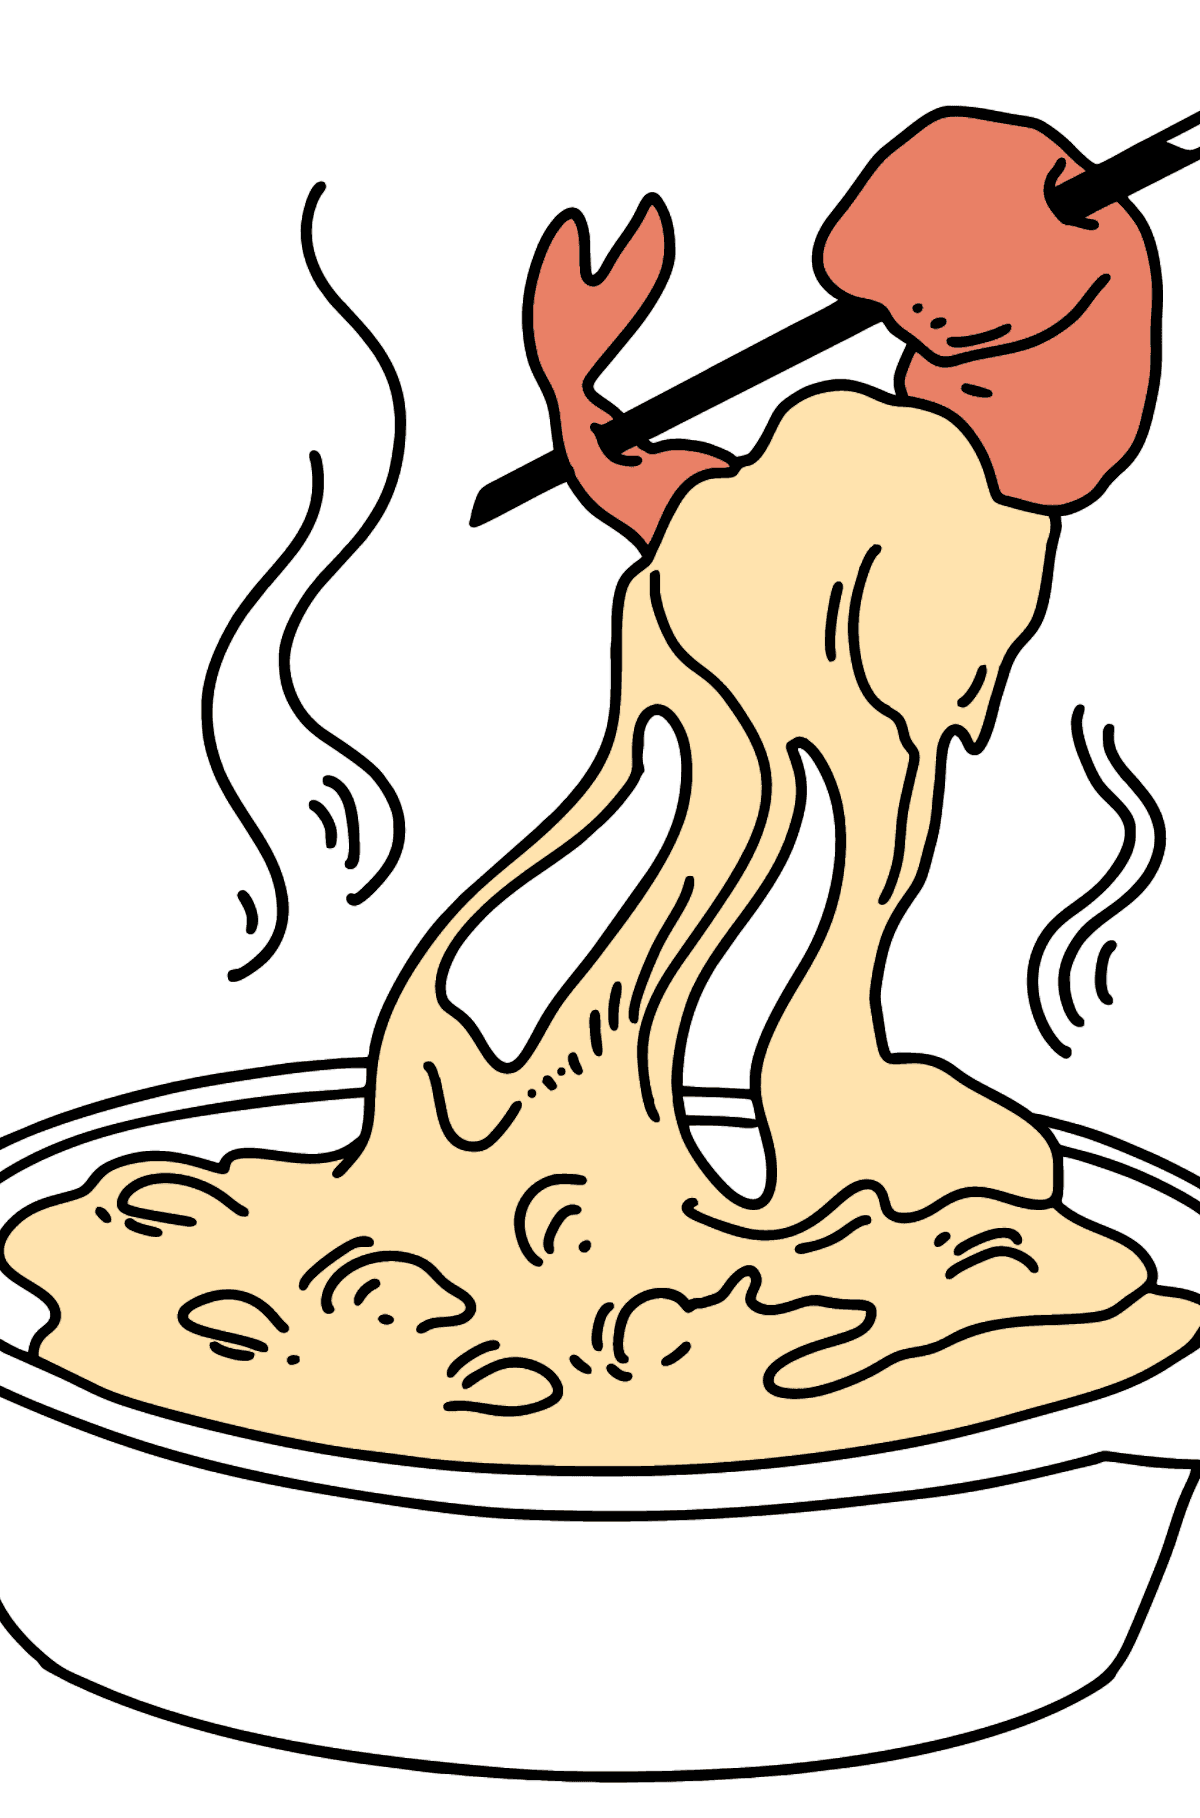 Fondue coloring page - Coloring Pages for Kids